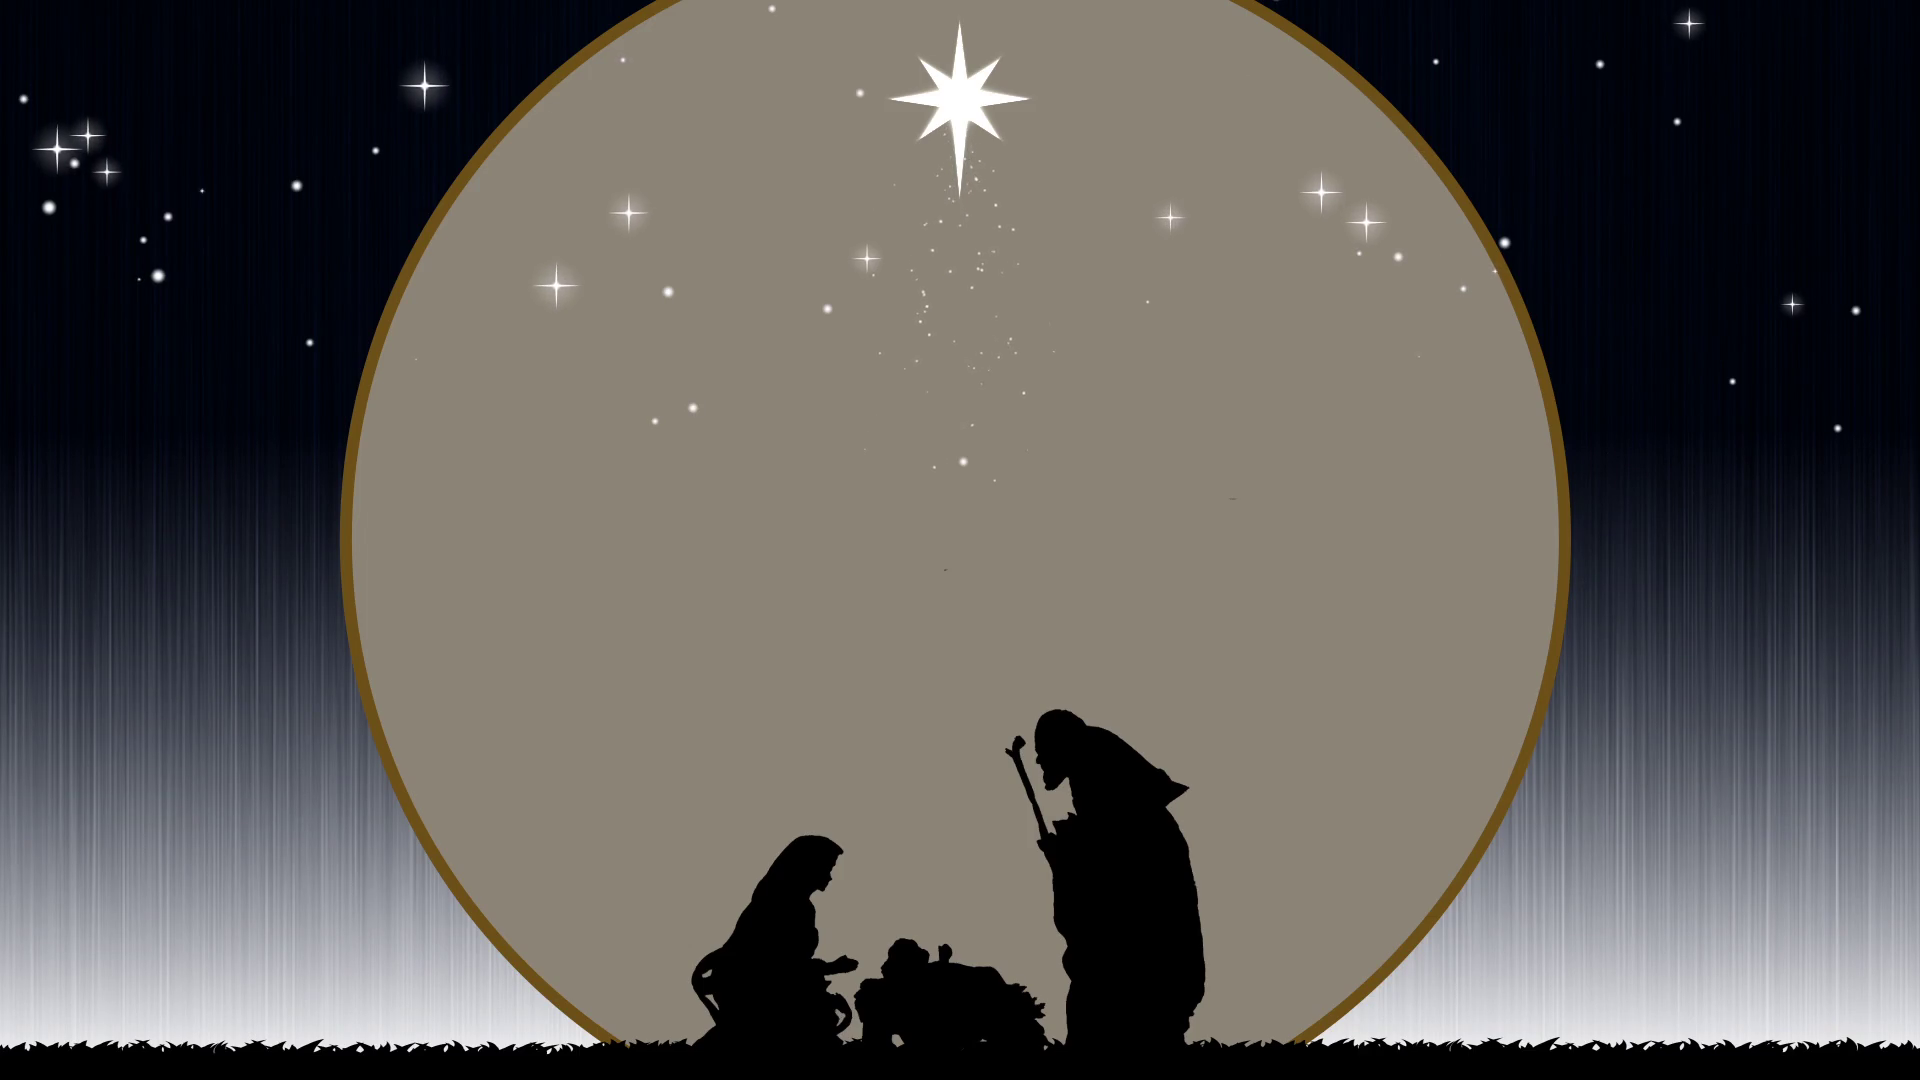 Joseph And Mary And Jesus Background Png & Free Joseph And Mary And Jesus Background.png Transparent Image